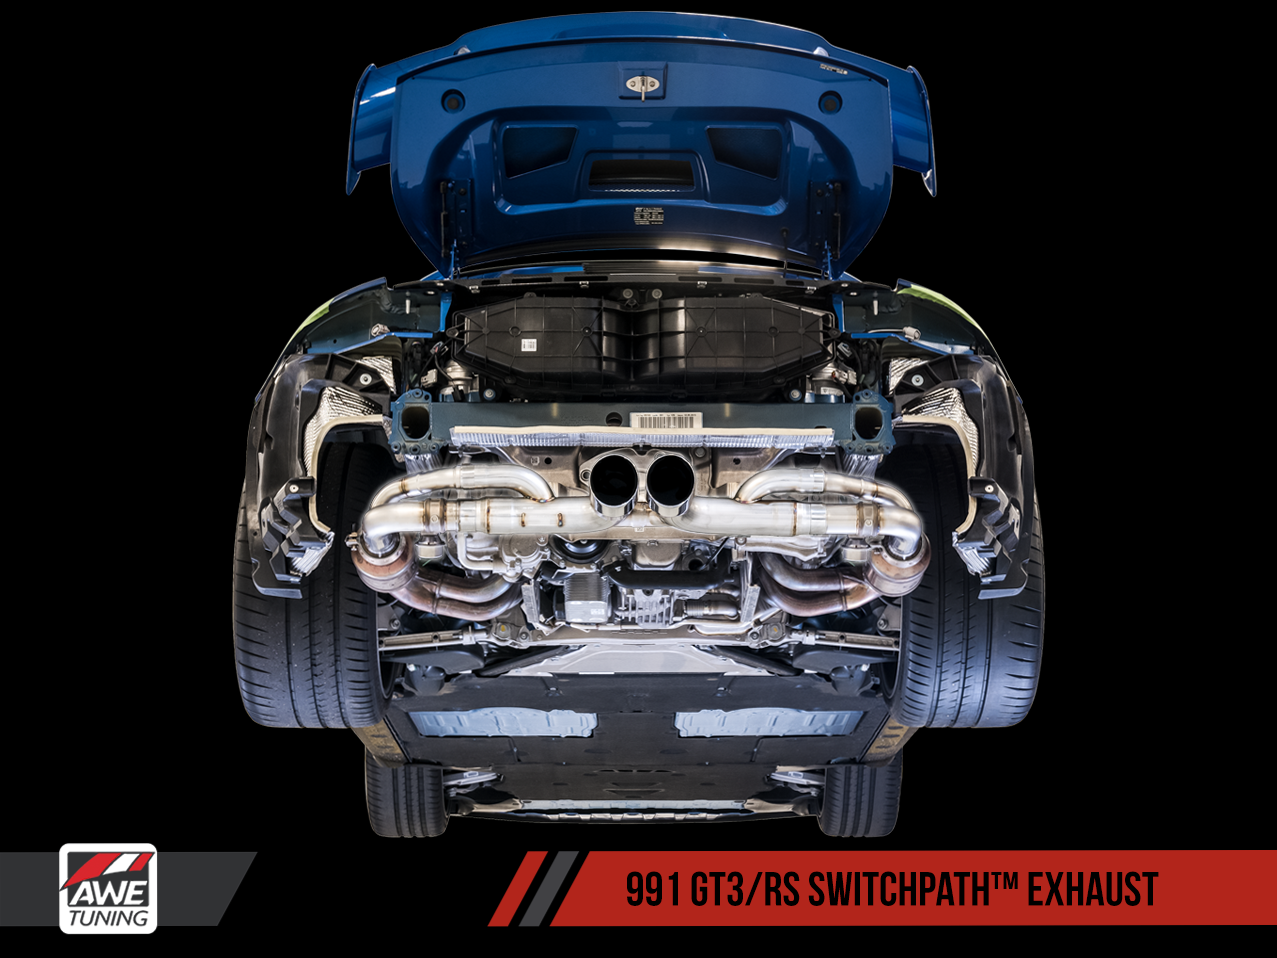 Engine - Exhaust - Partially Refurbished SwitchPath(TM) Exhaust for 991.1/.2 GT3/GT3 RS - Used - 2014 to 2019 Porsche GT3 - Horsha,m, PA 19044, United States